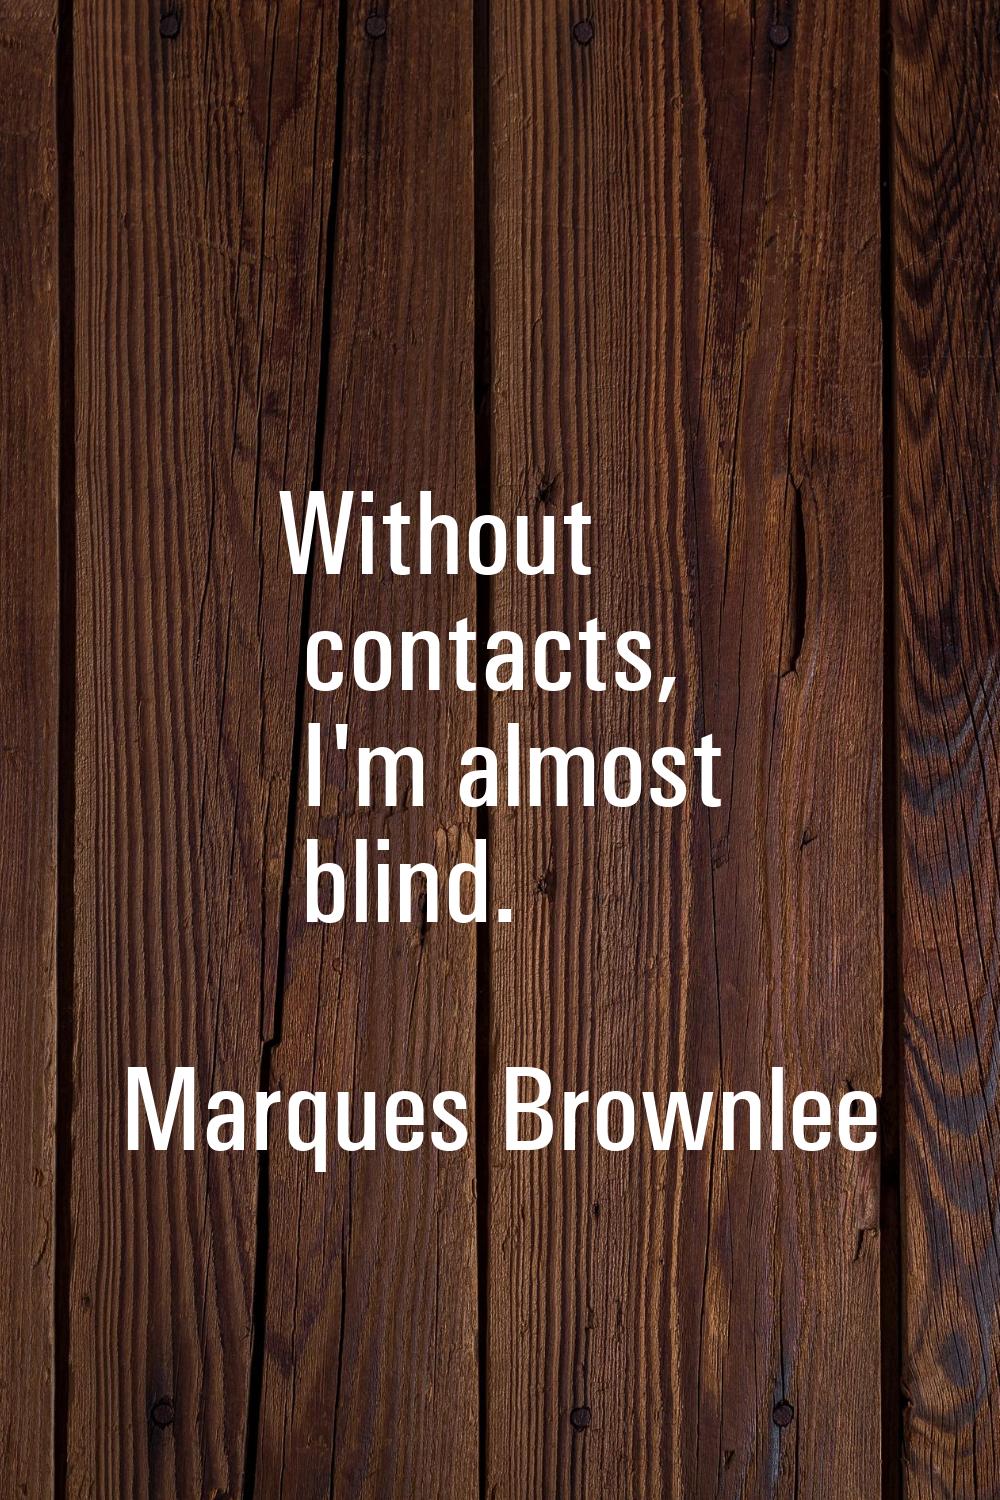 Without contacts, I'm almost blind.